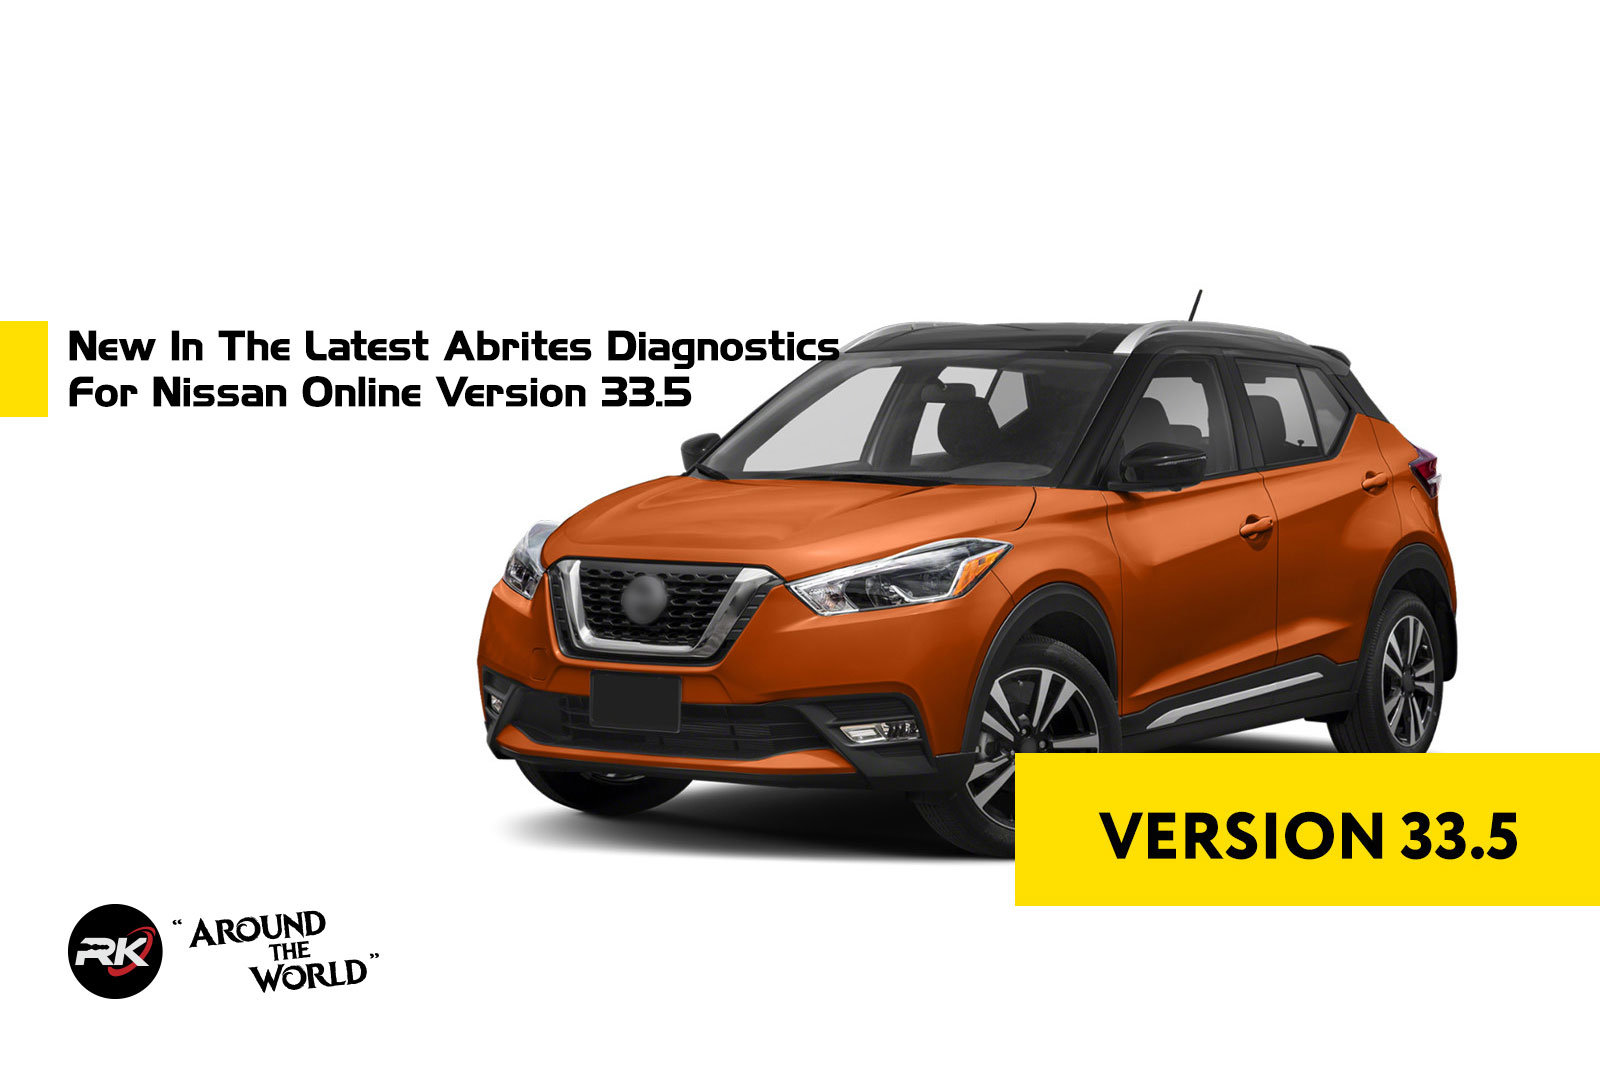 New In The Latest Abrites Diagnostics For Nissan Online Version 33.5